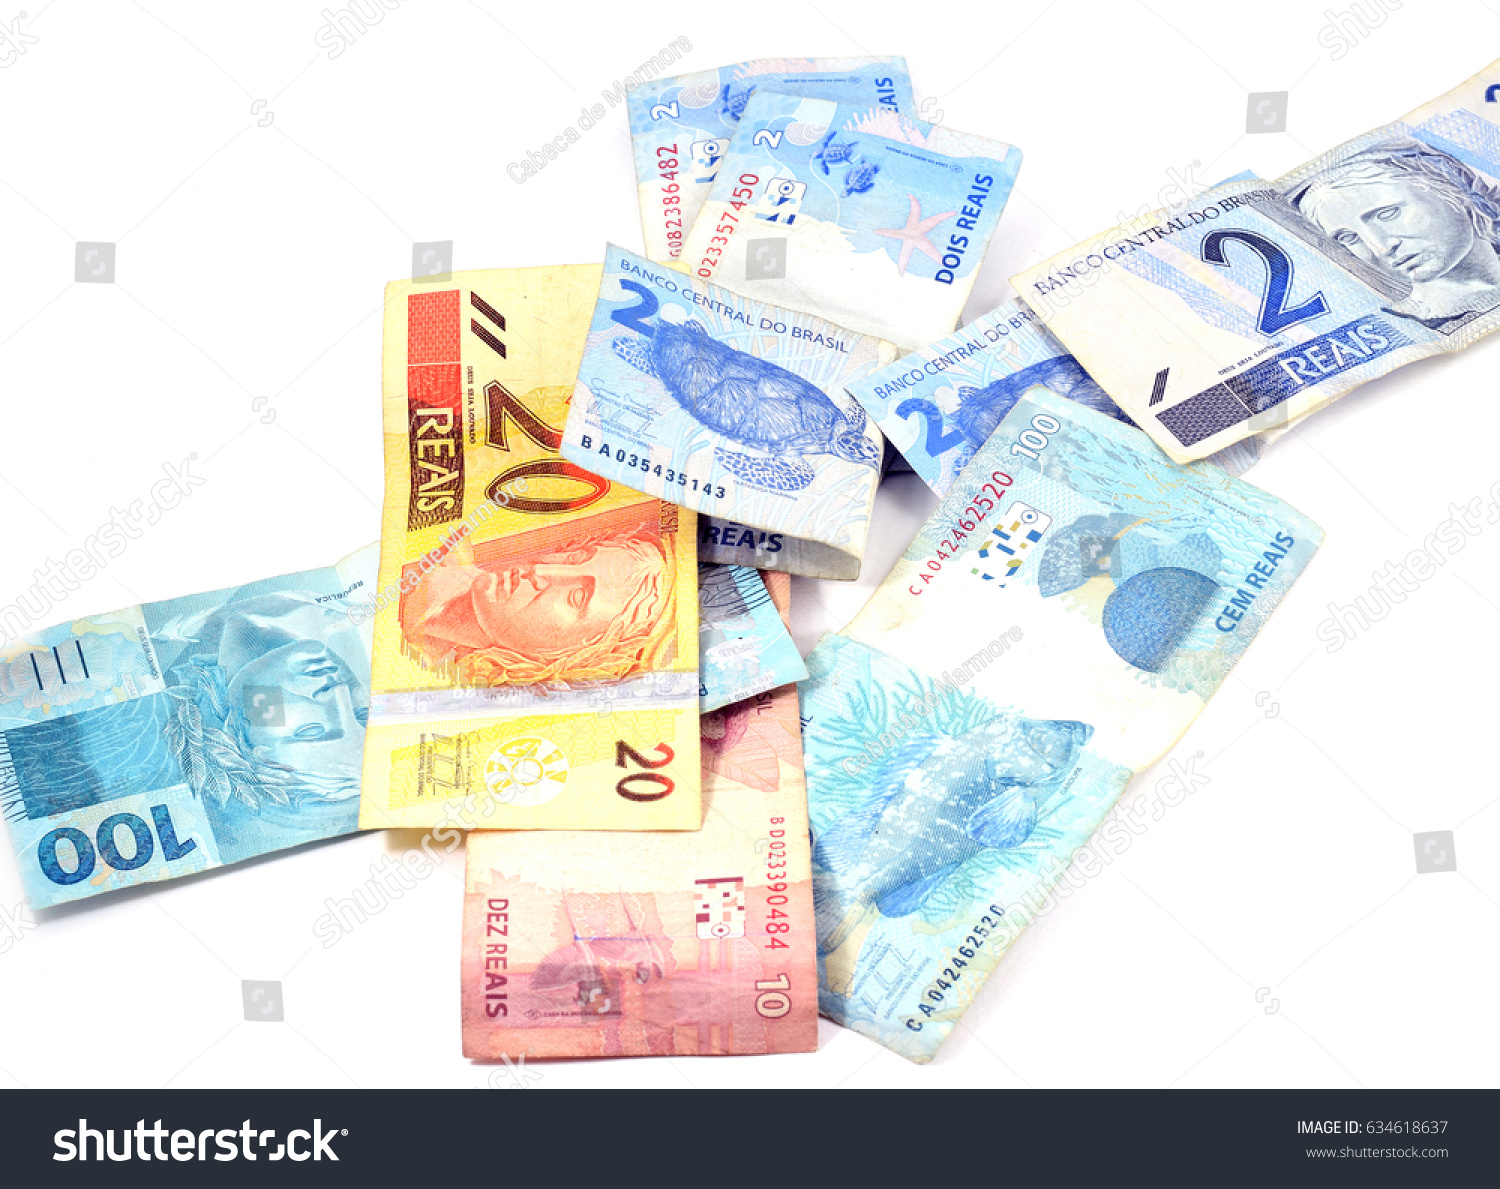 Brazilian currency bills (real and reais) isolated, white background: 2, 10, 20, 50, 100 #634618637